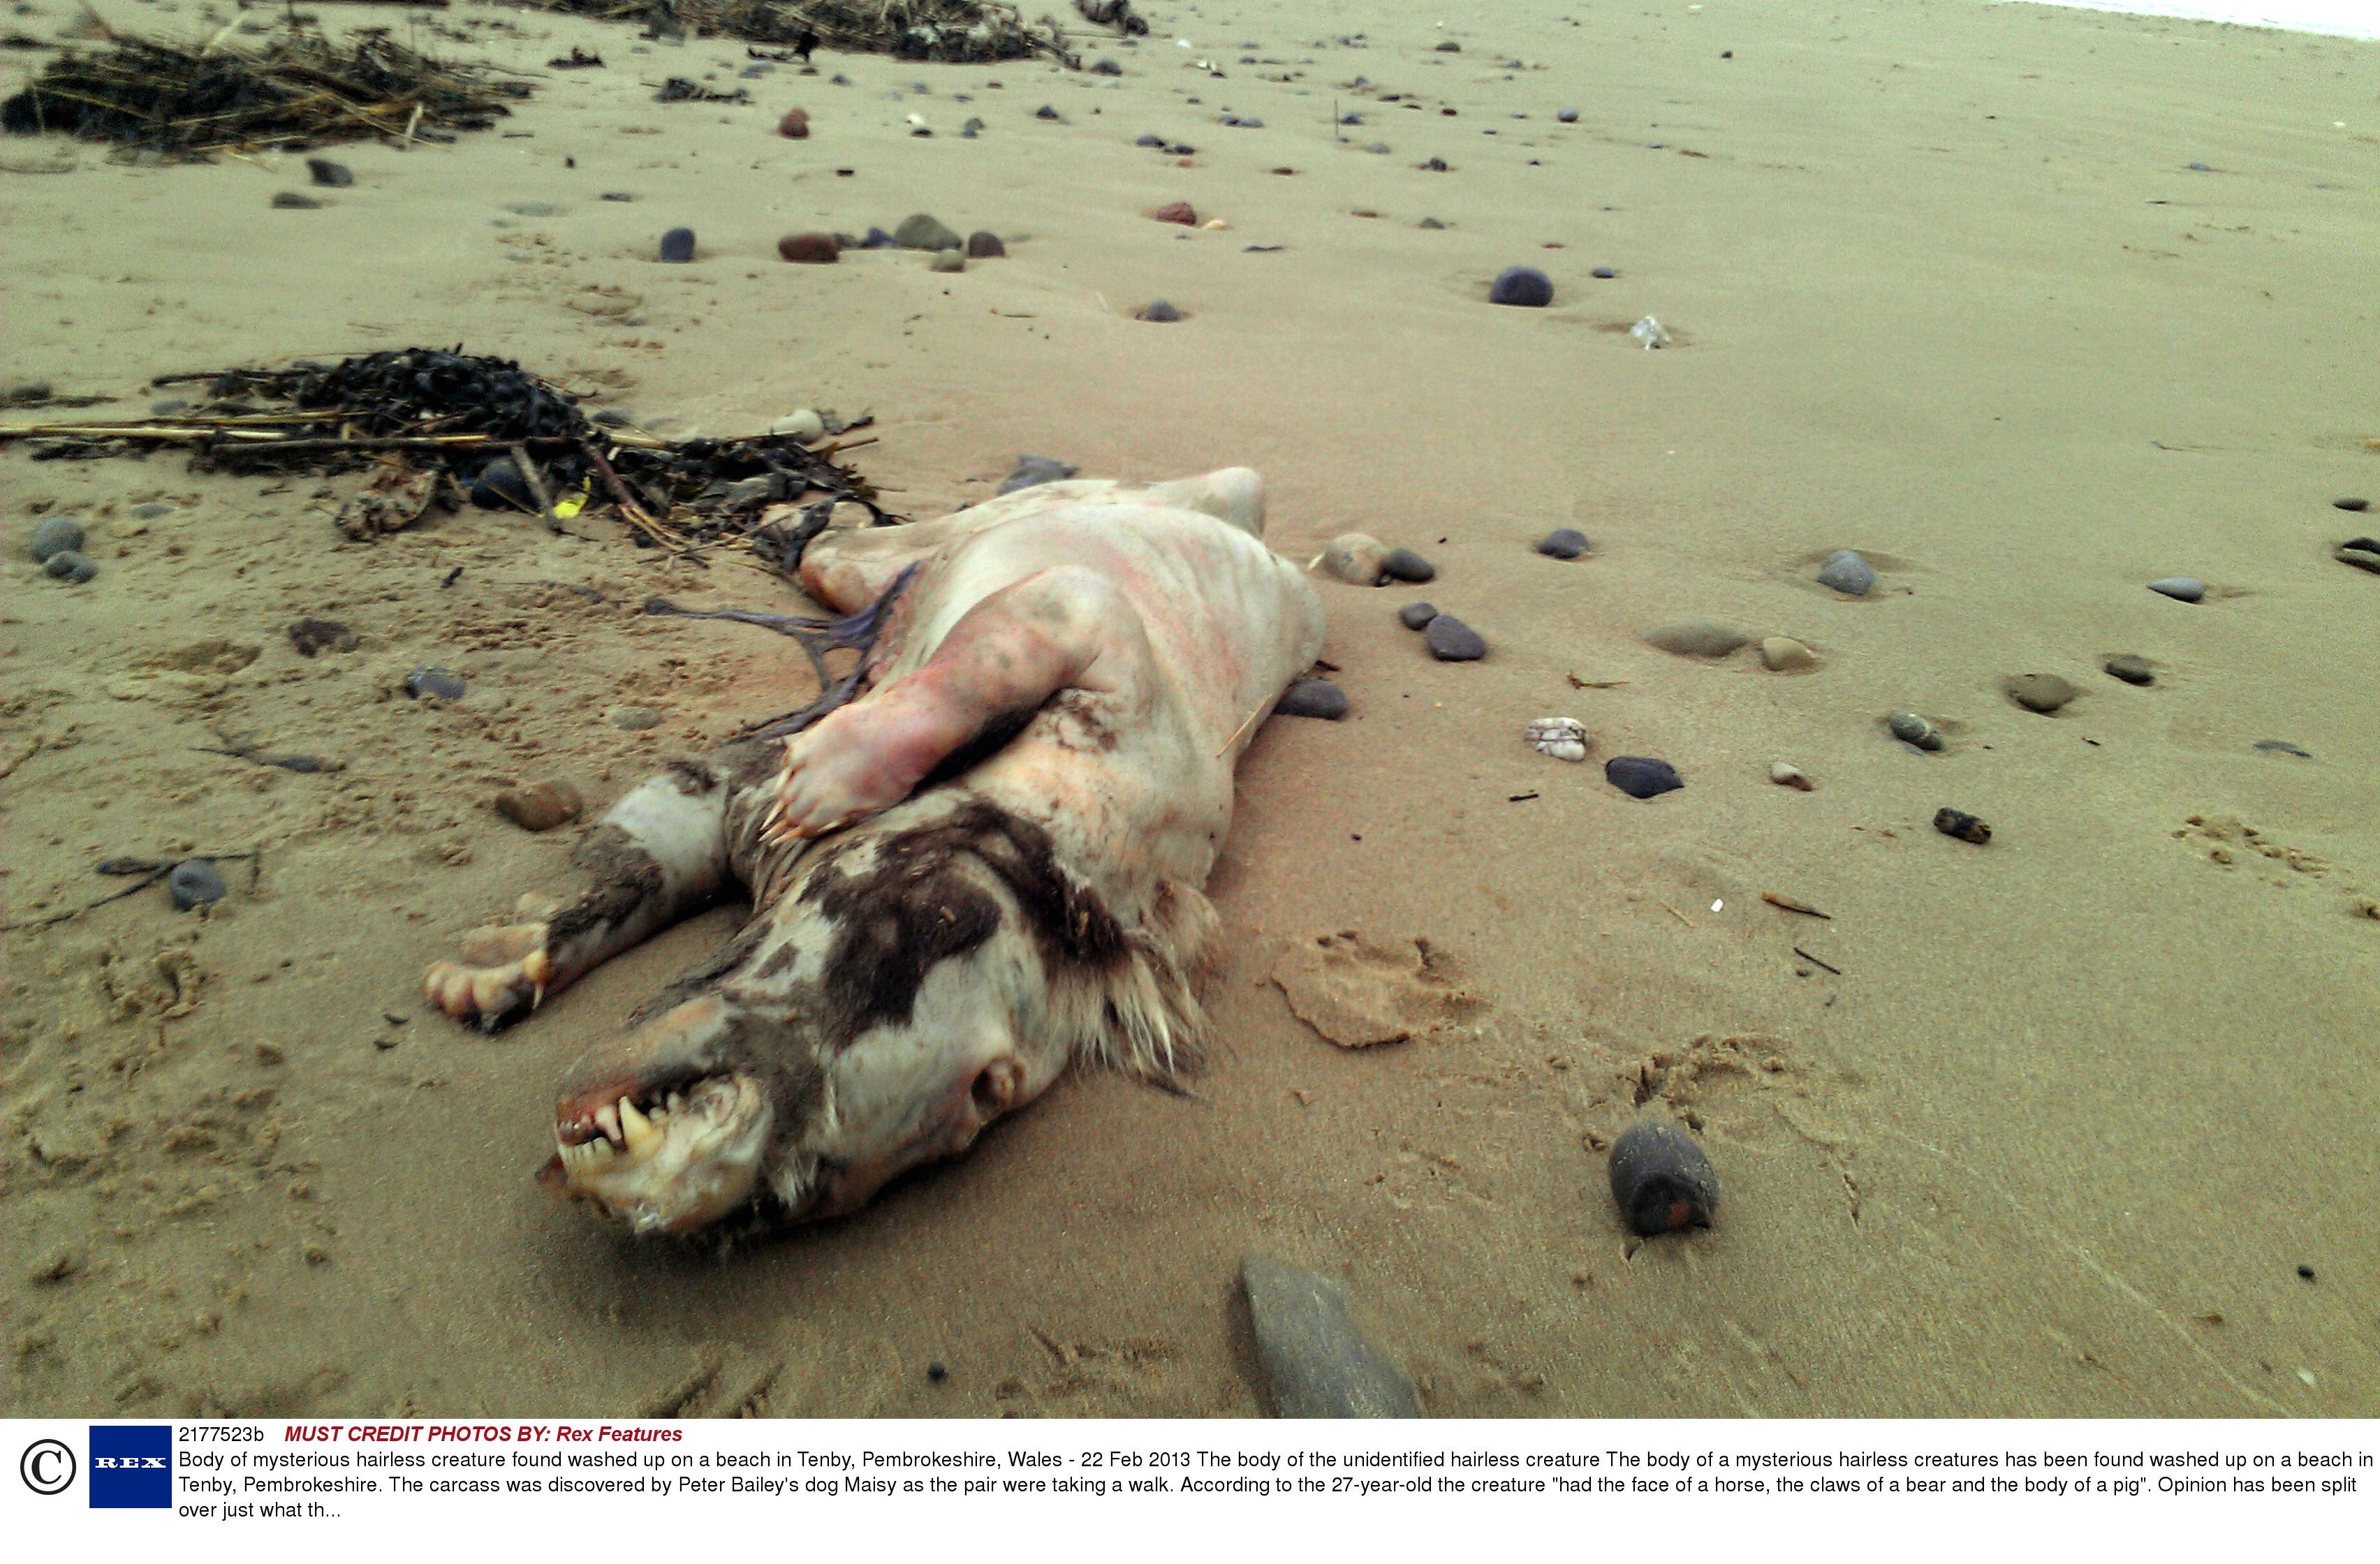 Mysterious creature found on Welsh beach